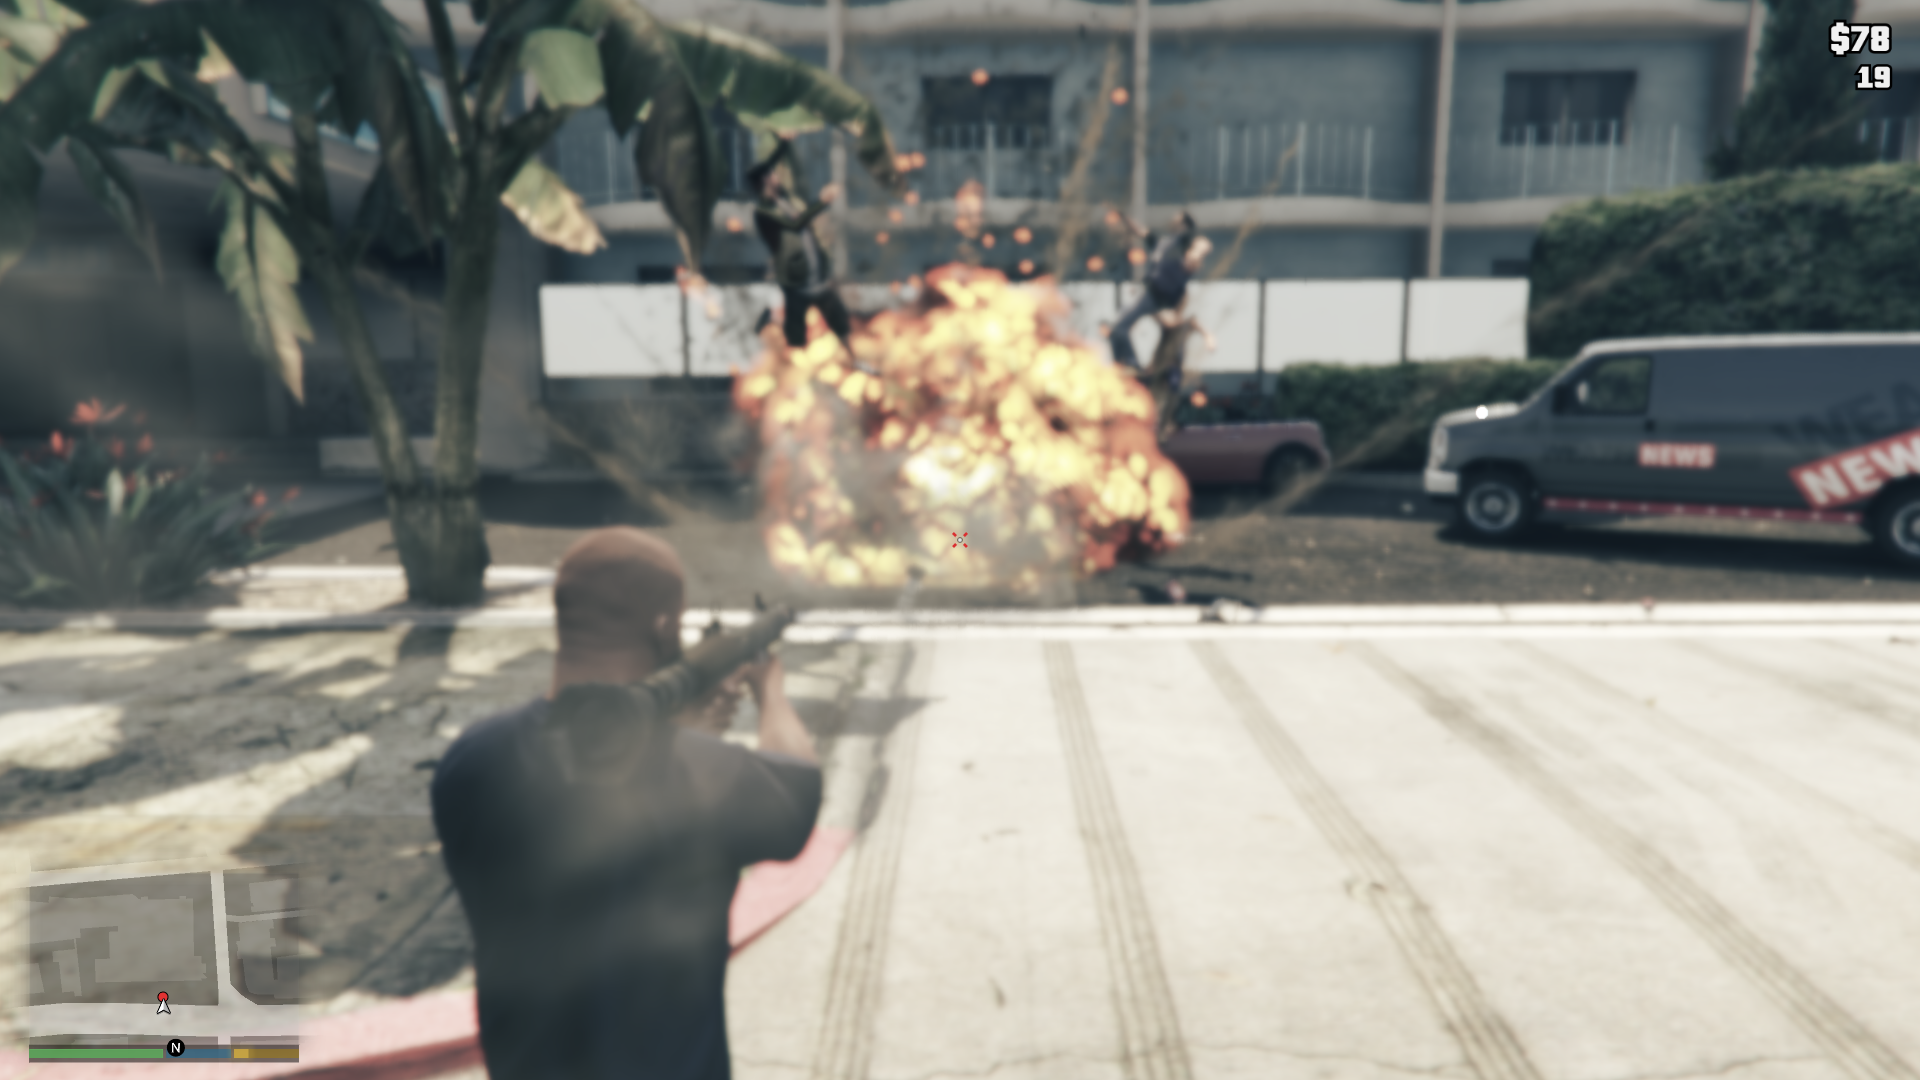 How To Get a Gold Medal in the Paparazzo - Reality Check Mission in GTA 5